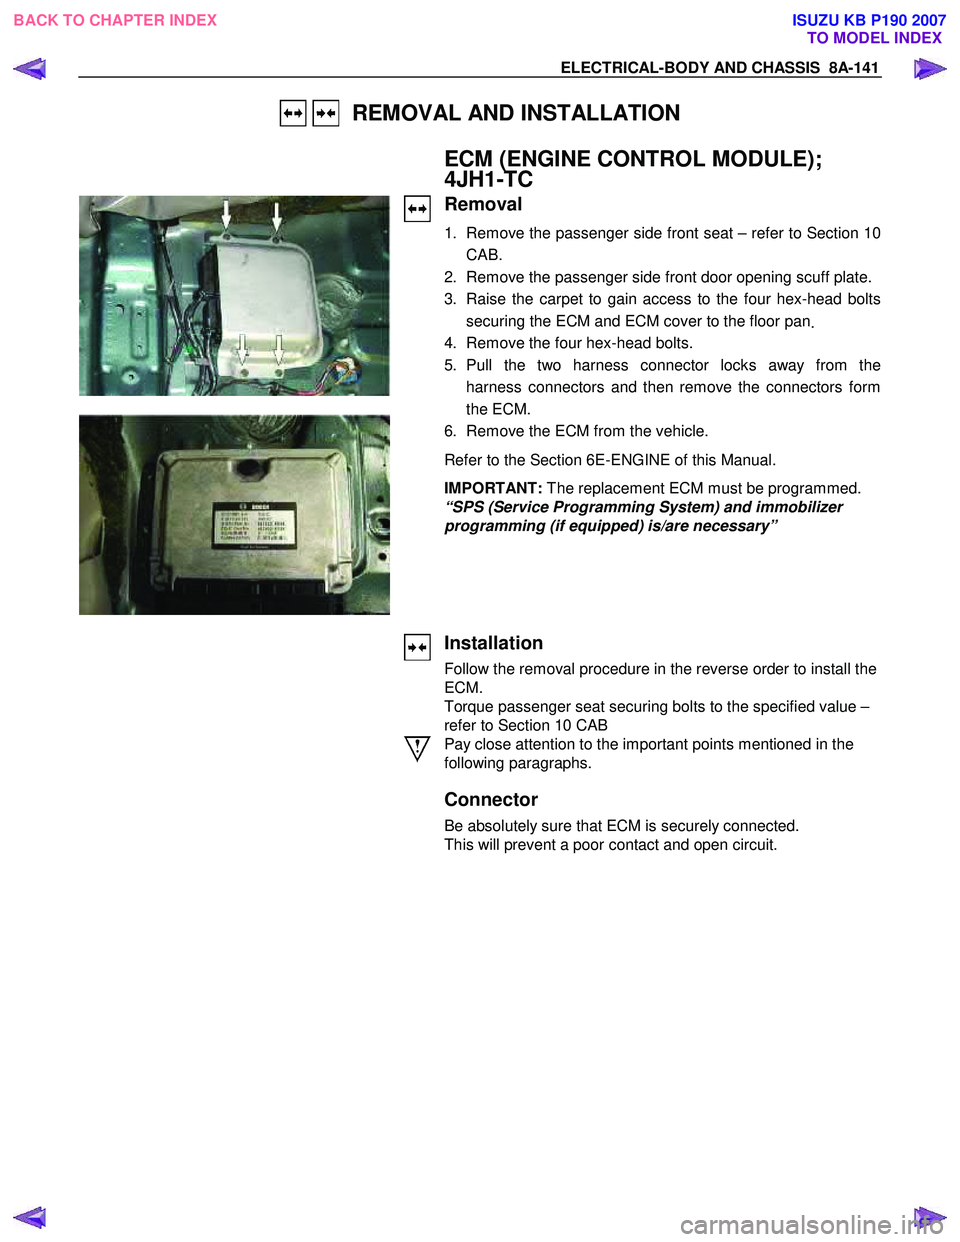 ISUZU KB P190 2007  Workshop Owners Manual ELECTRICAL-BODY AND CHASSIS  8A-141 
   REMOVAL AND INSTALLATION 
  
ECM (ENGINE CONTROL MODULE);  
4JH1-TC 
 
 
Removal 
1.  Remove the passenger side front seat – refer to Section 10 
CAB. 
2.  Re